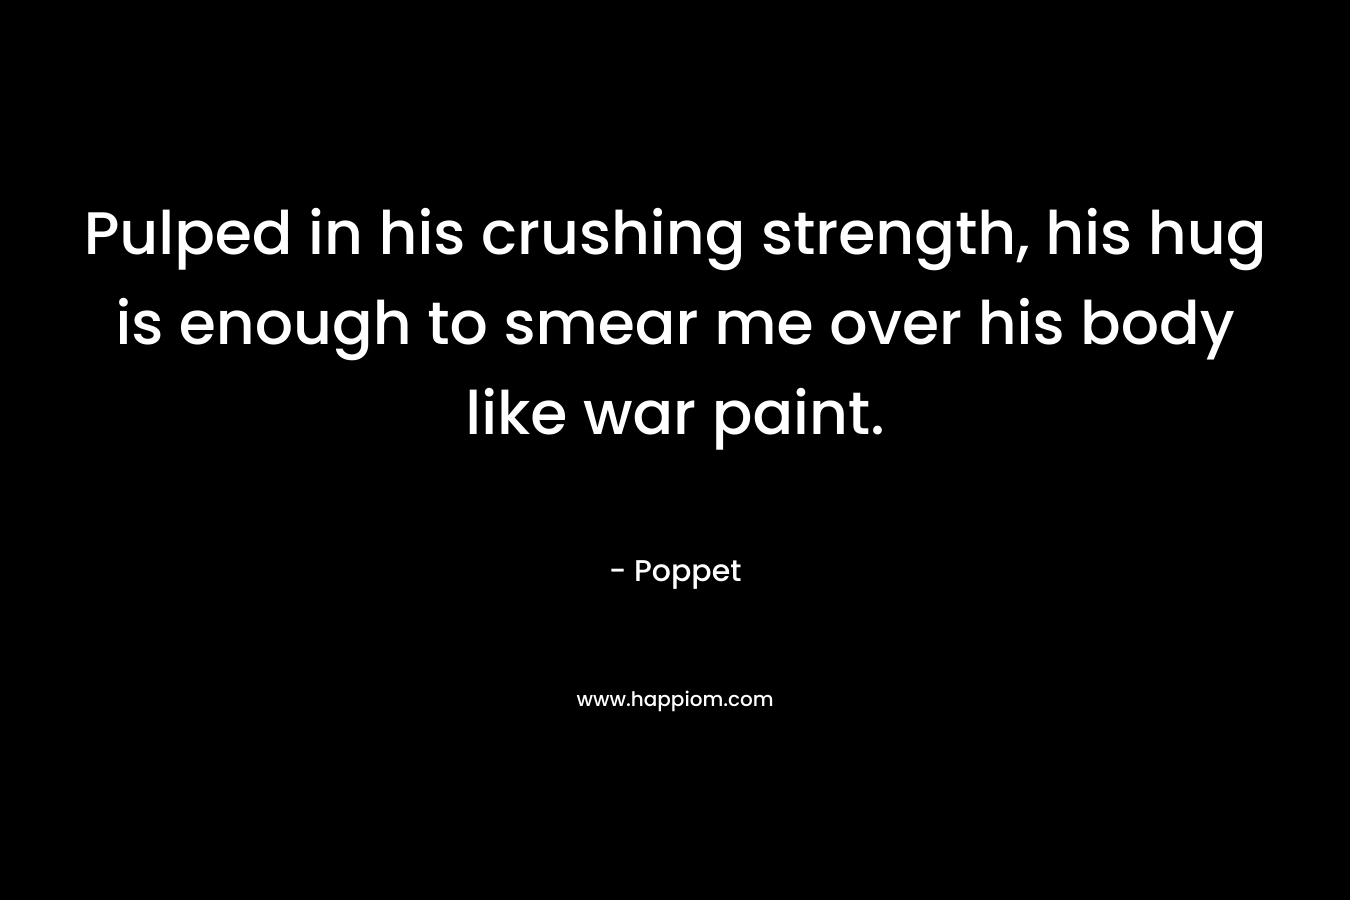 Pulped in his crushing strength, his hug is enough to smear me over his body like war paint.